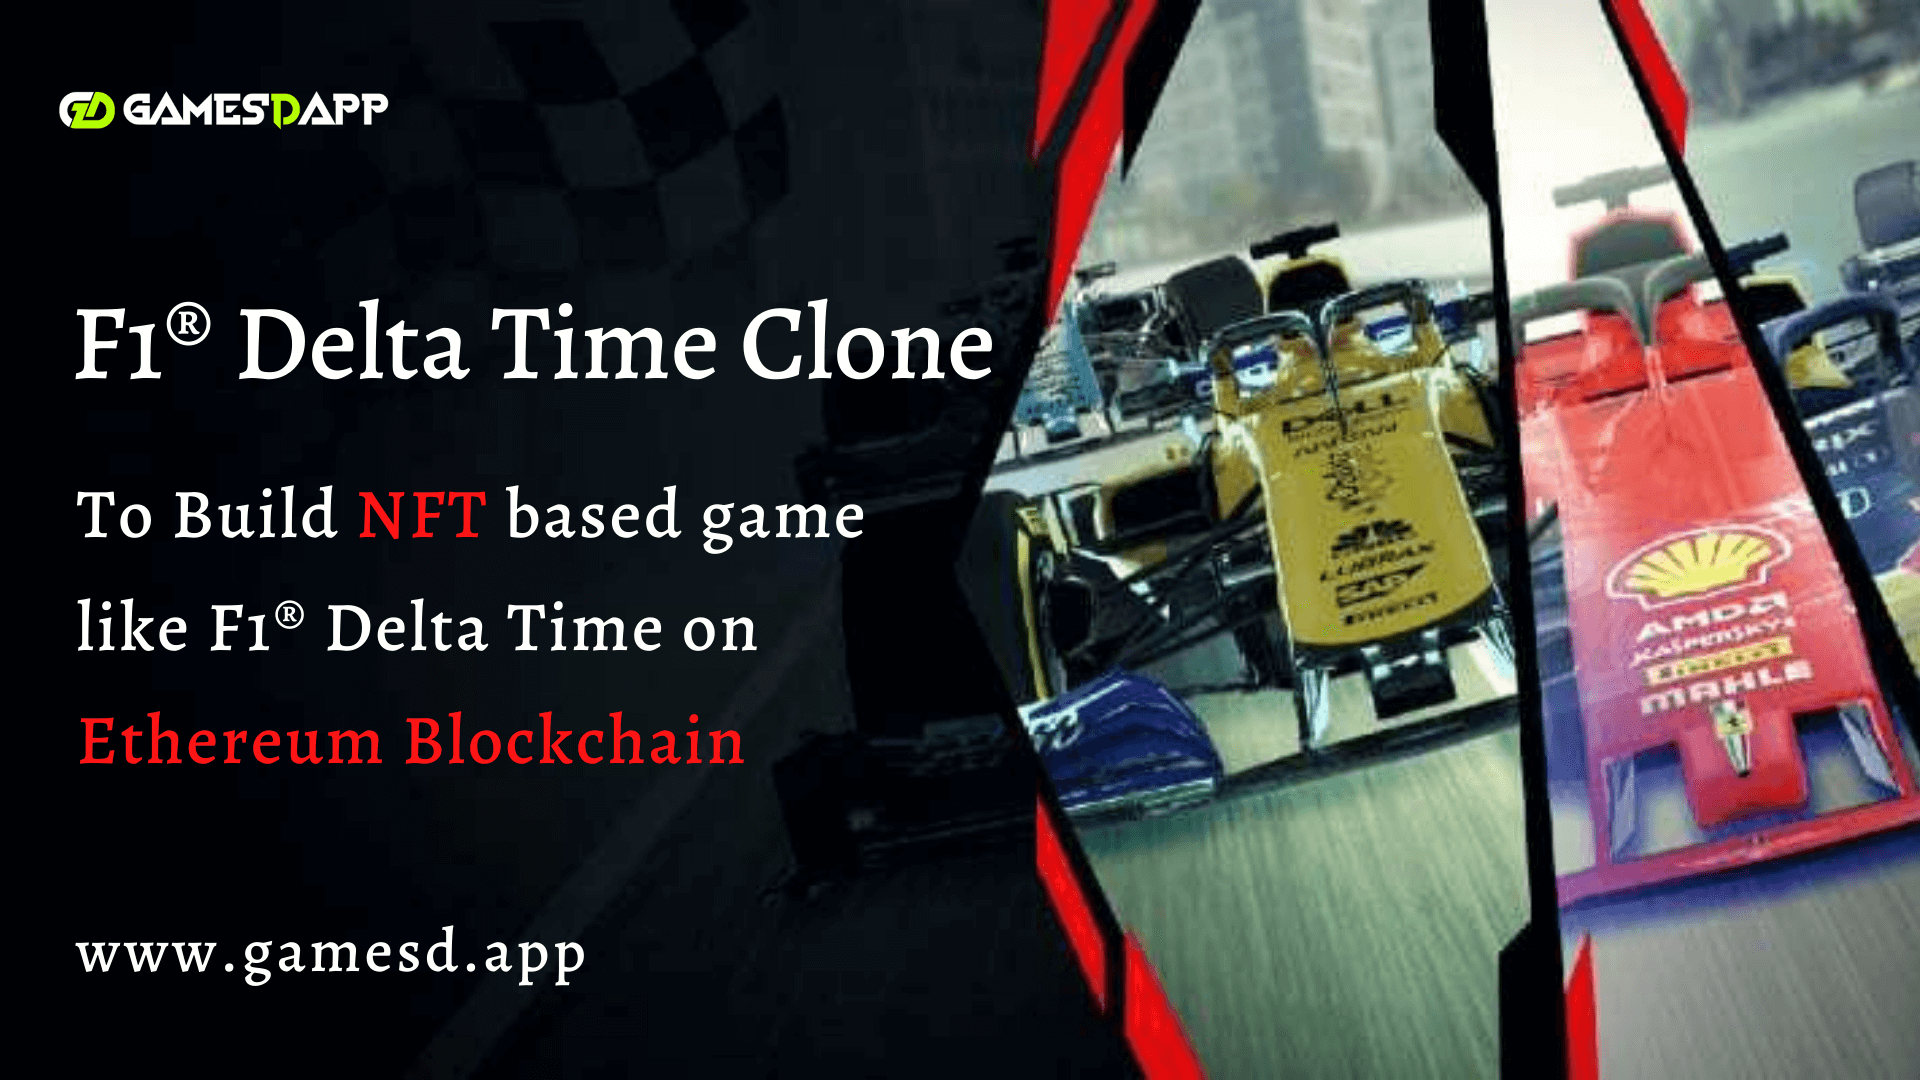 F1 Delta Time Clone - Build NFT based game like F1® Delta Time on Ethereum Blockchain